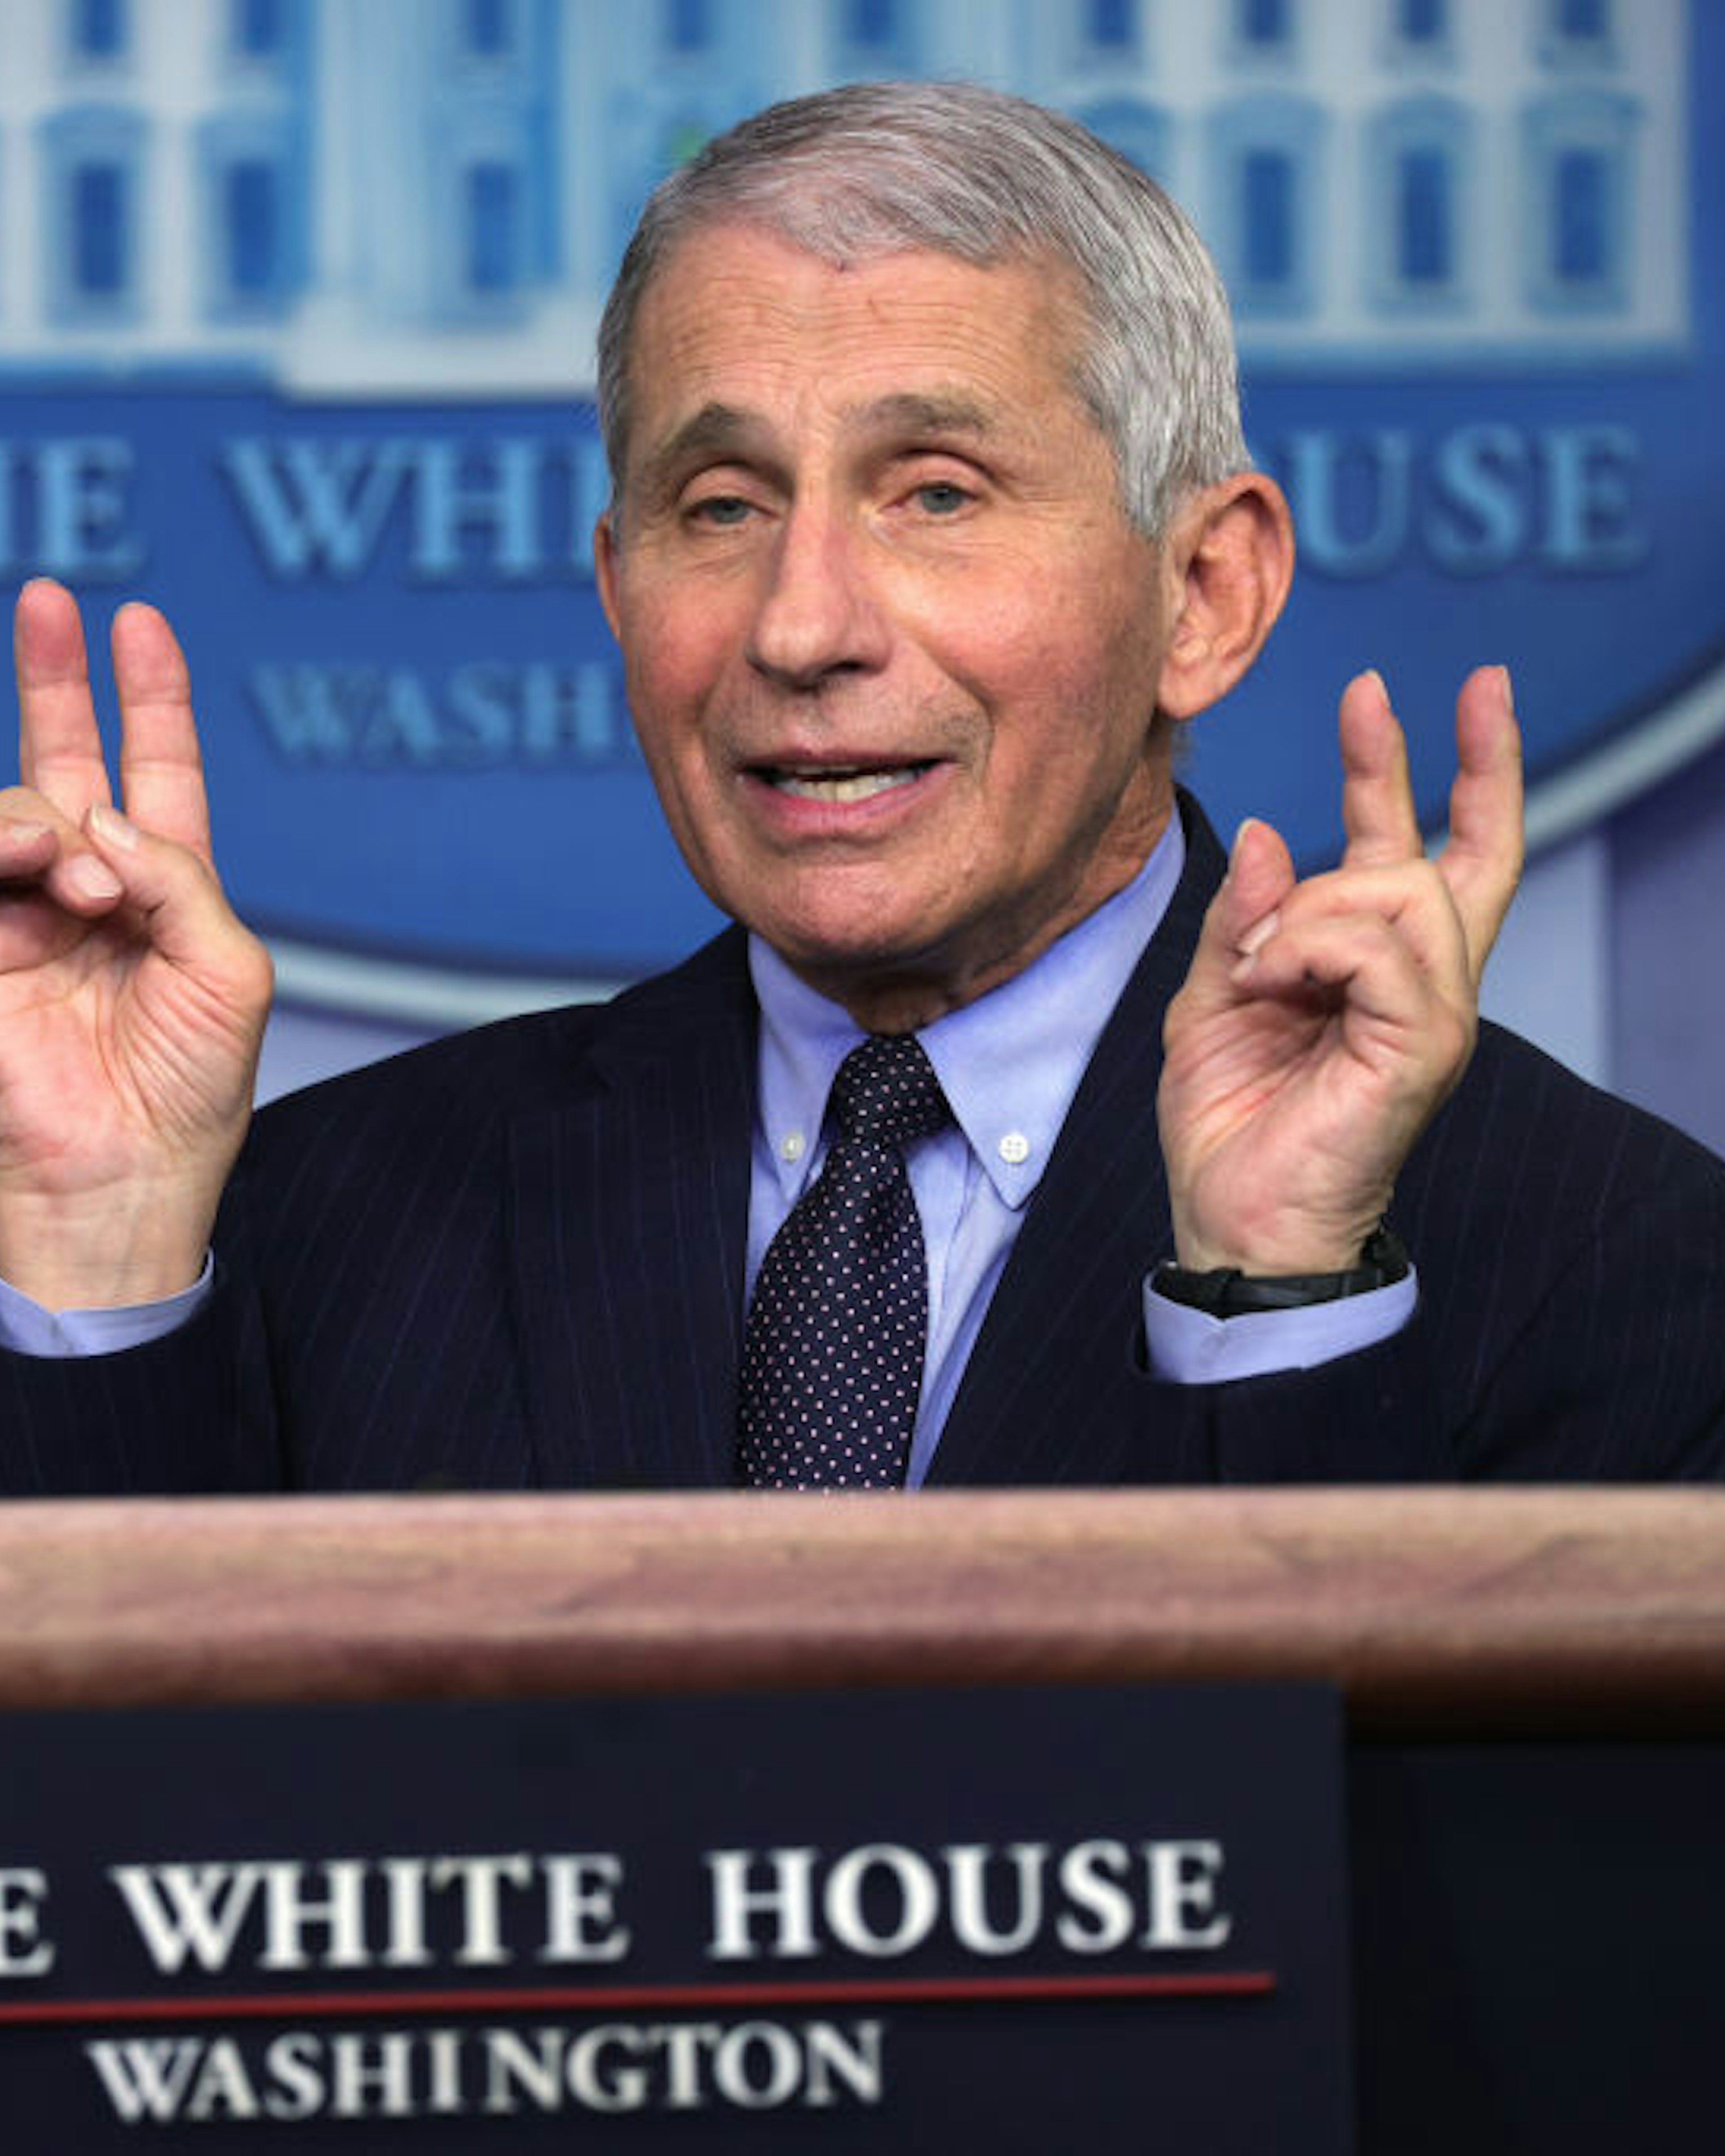 WASHINGTON, DC - JANUARY 21: Dr Anthony Fauci, Director of the National Institute of Allergy and Infectious Diseases, speaks during a White House press briefing, conducted by White House Press Secretary Jen Psaki, at the James Brady Press Briefing Room of the White House January 21, 2021 in Washington, DC. Psaki held her second press briefing since President Joe Biden took office yesterday. (Photo by Alex Wong/Getty Images)